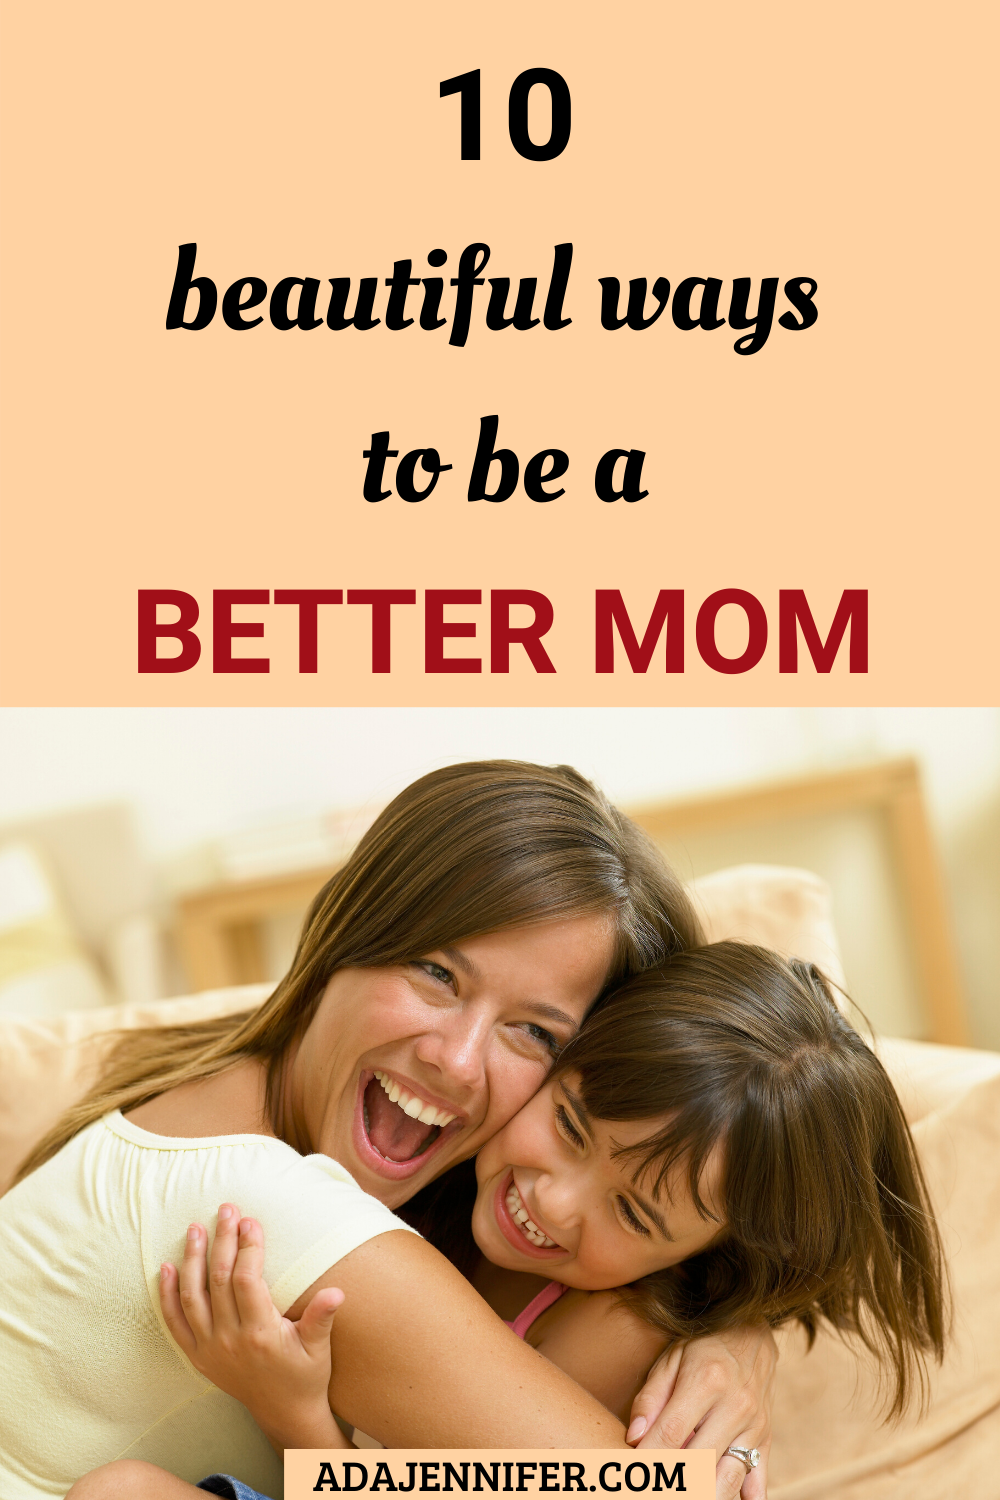 how to be a good mom when depressed